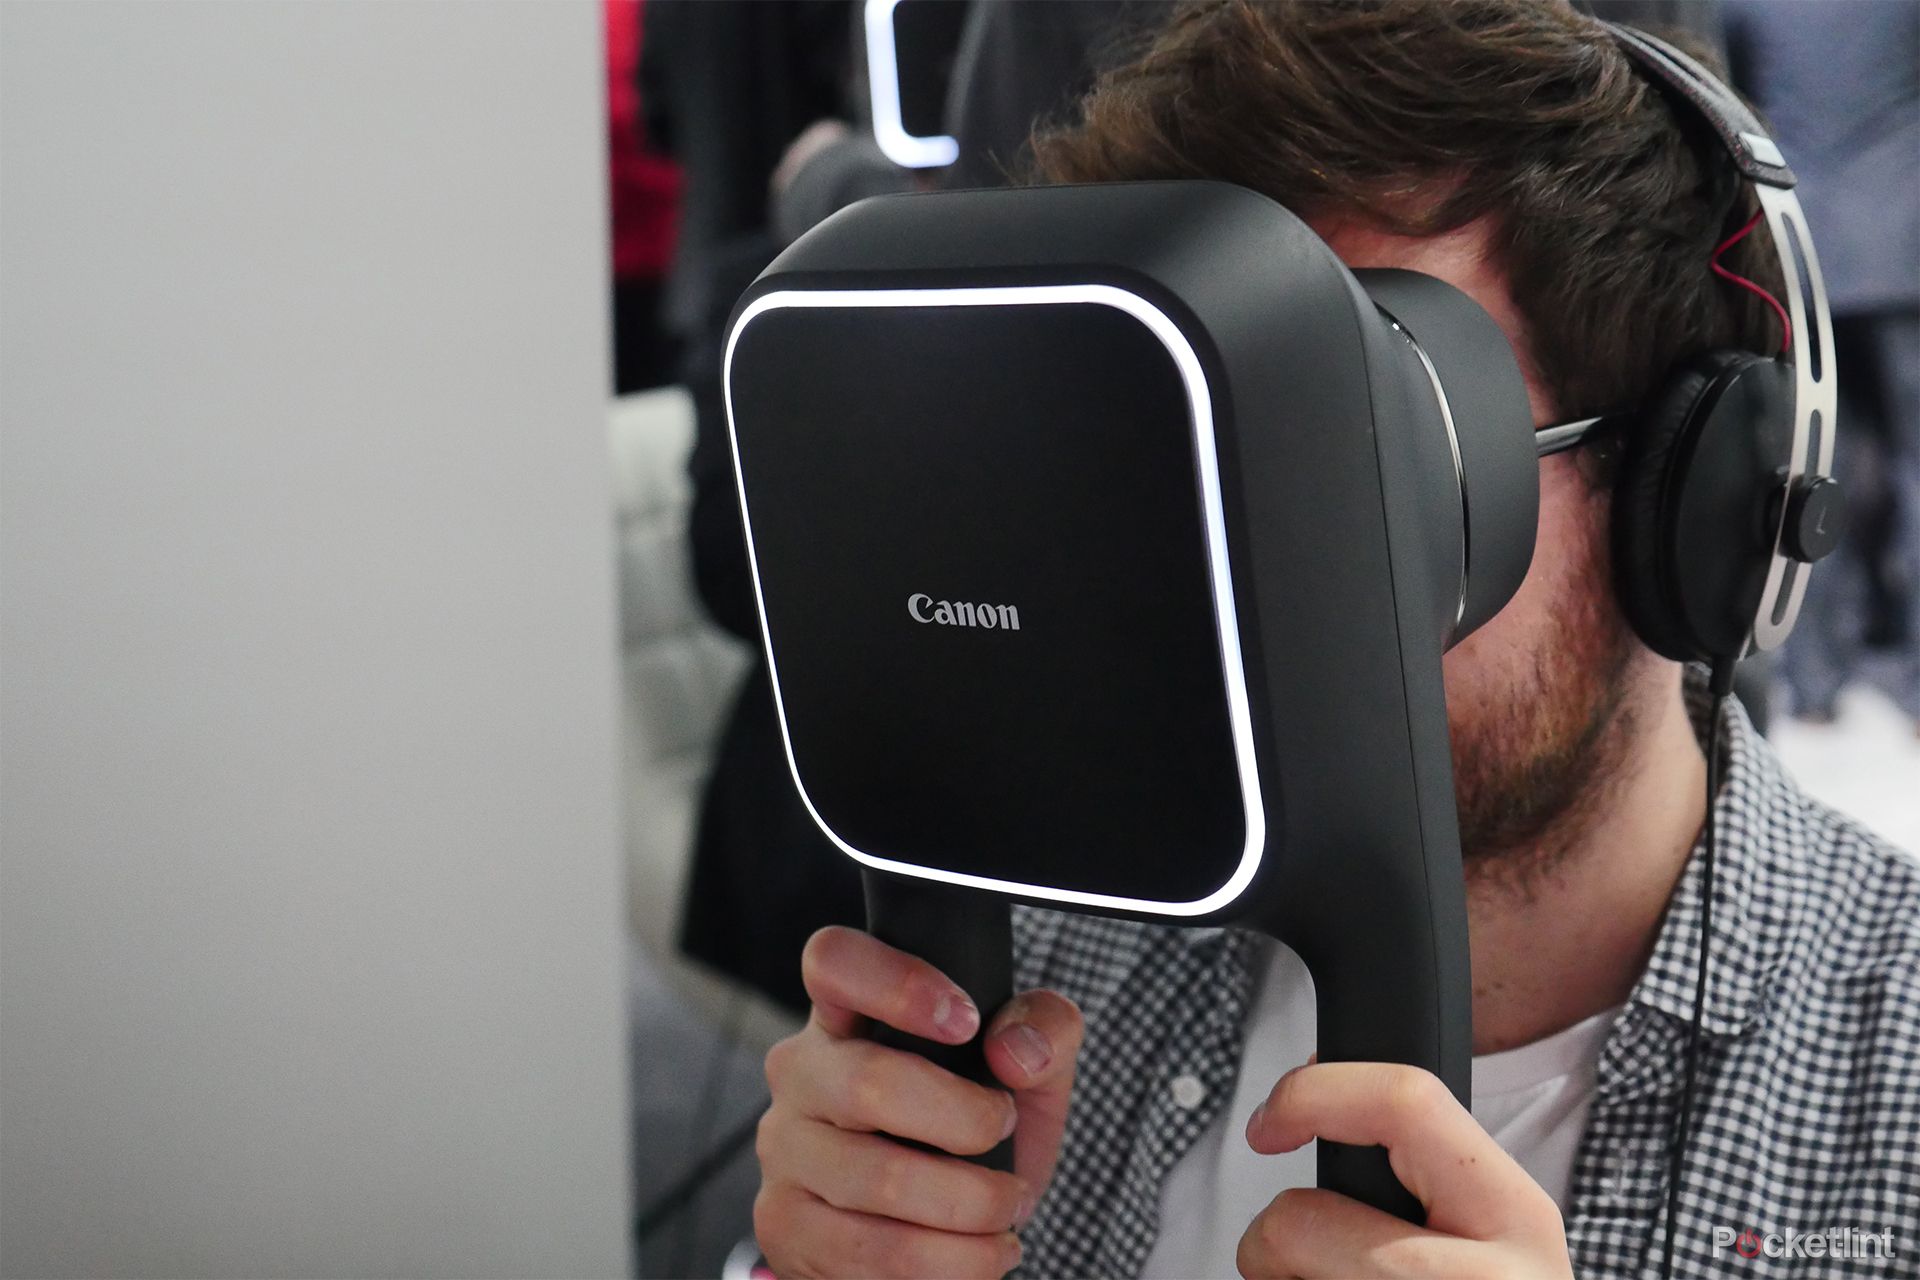 using canon s vr headset hefty handheld solution wins on resolution not practicality image 1